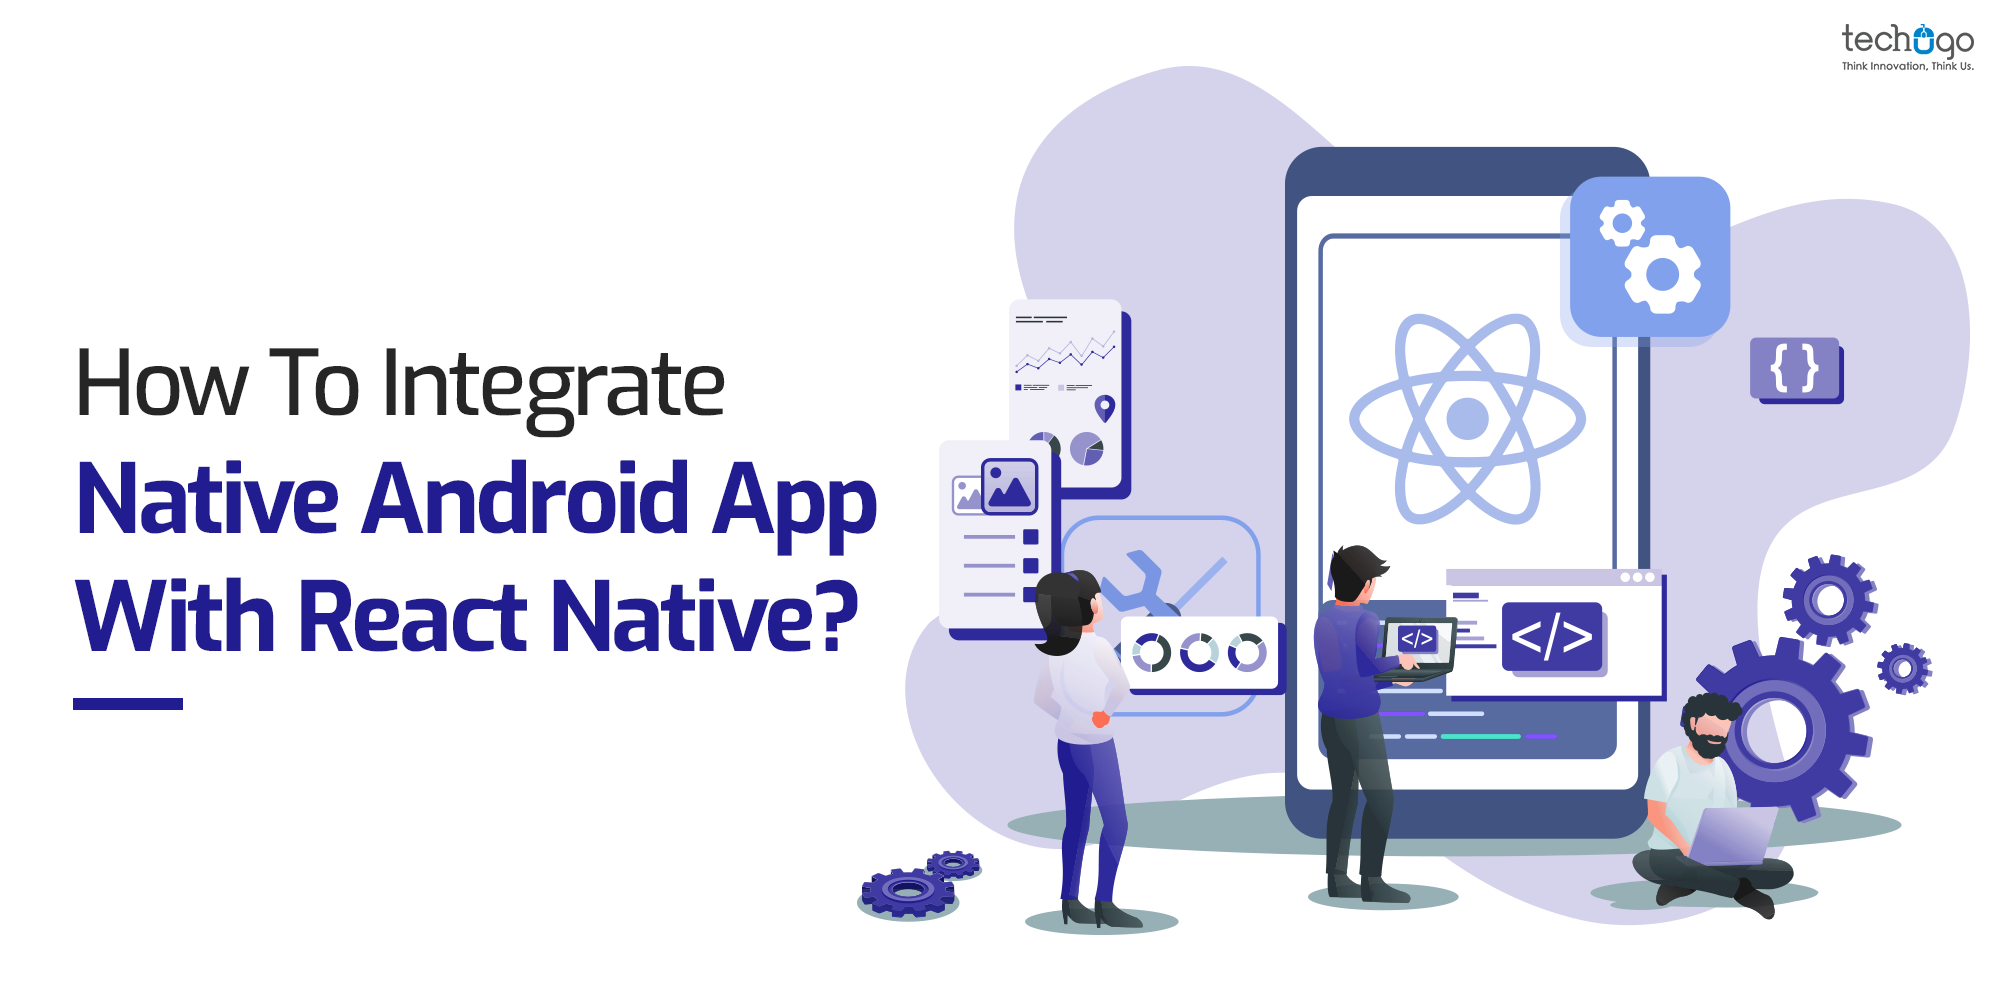 How To Integrate Native Android App With React Native?